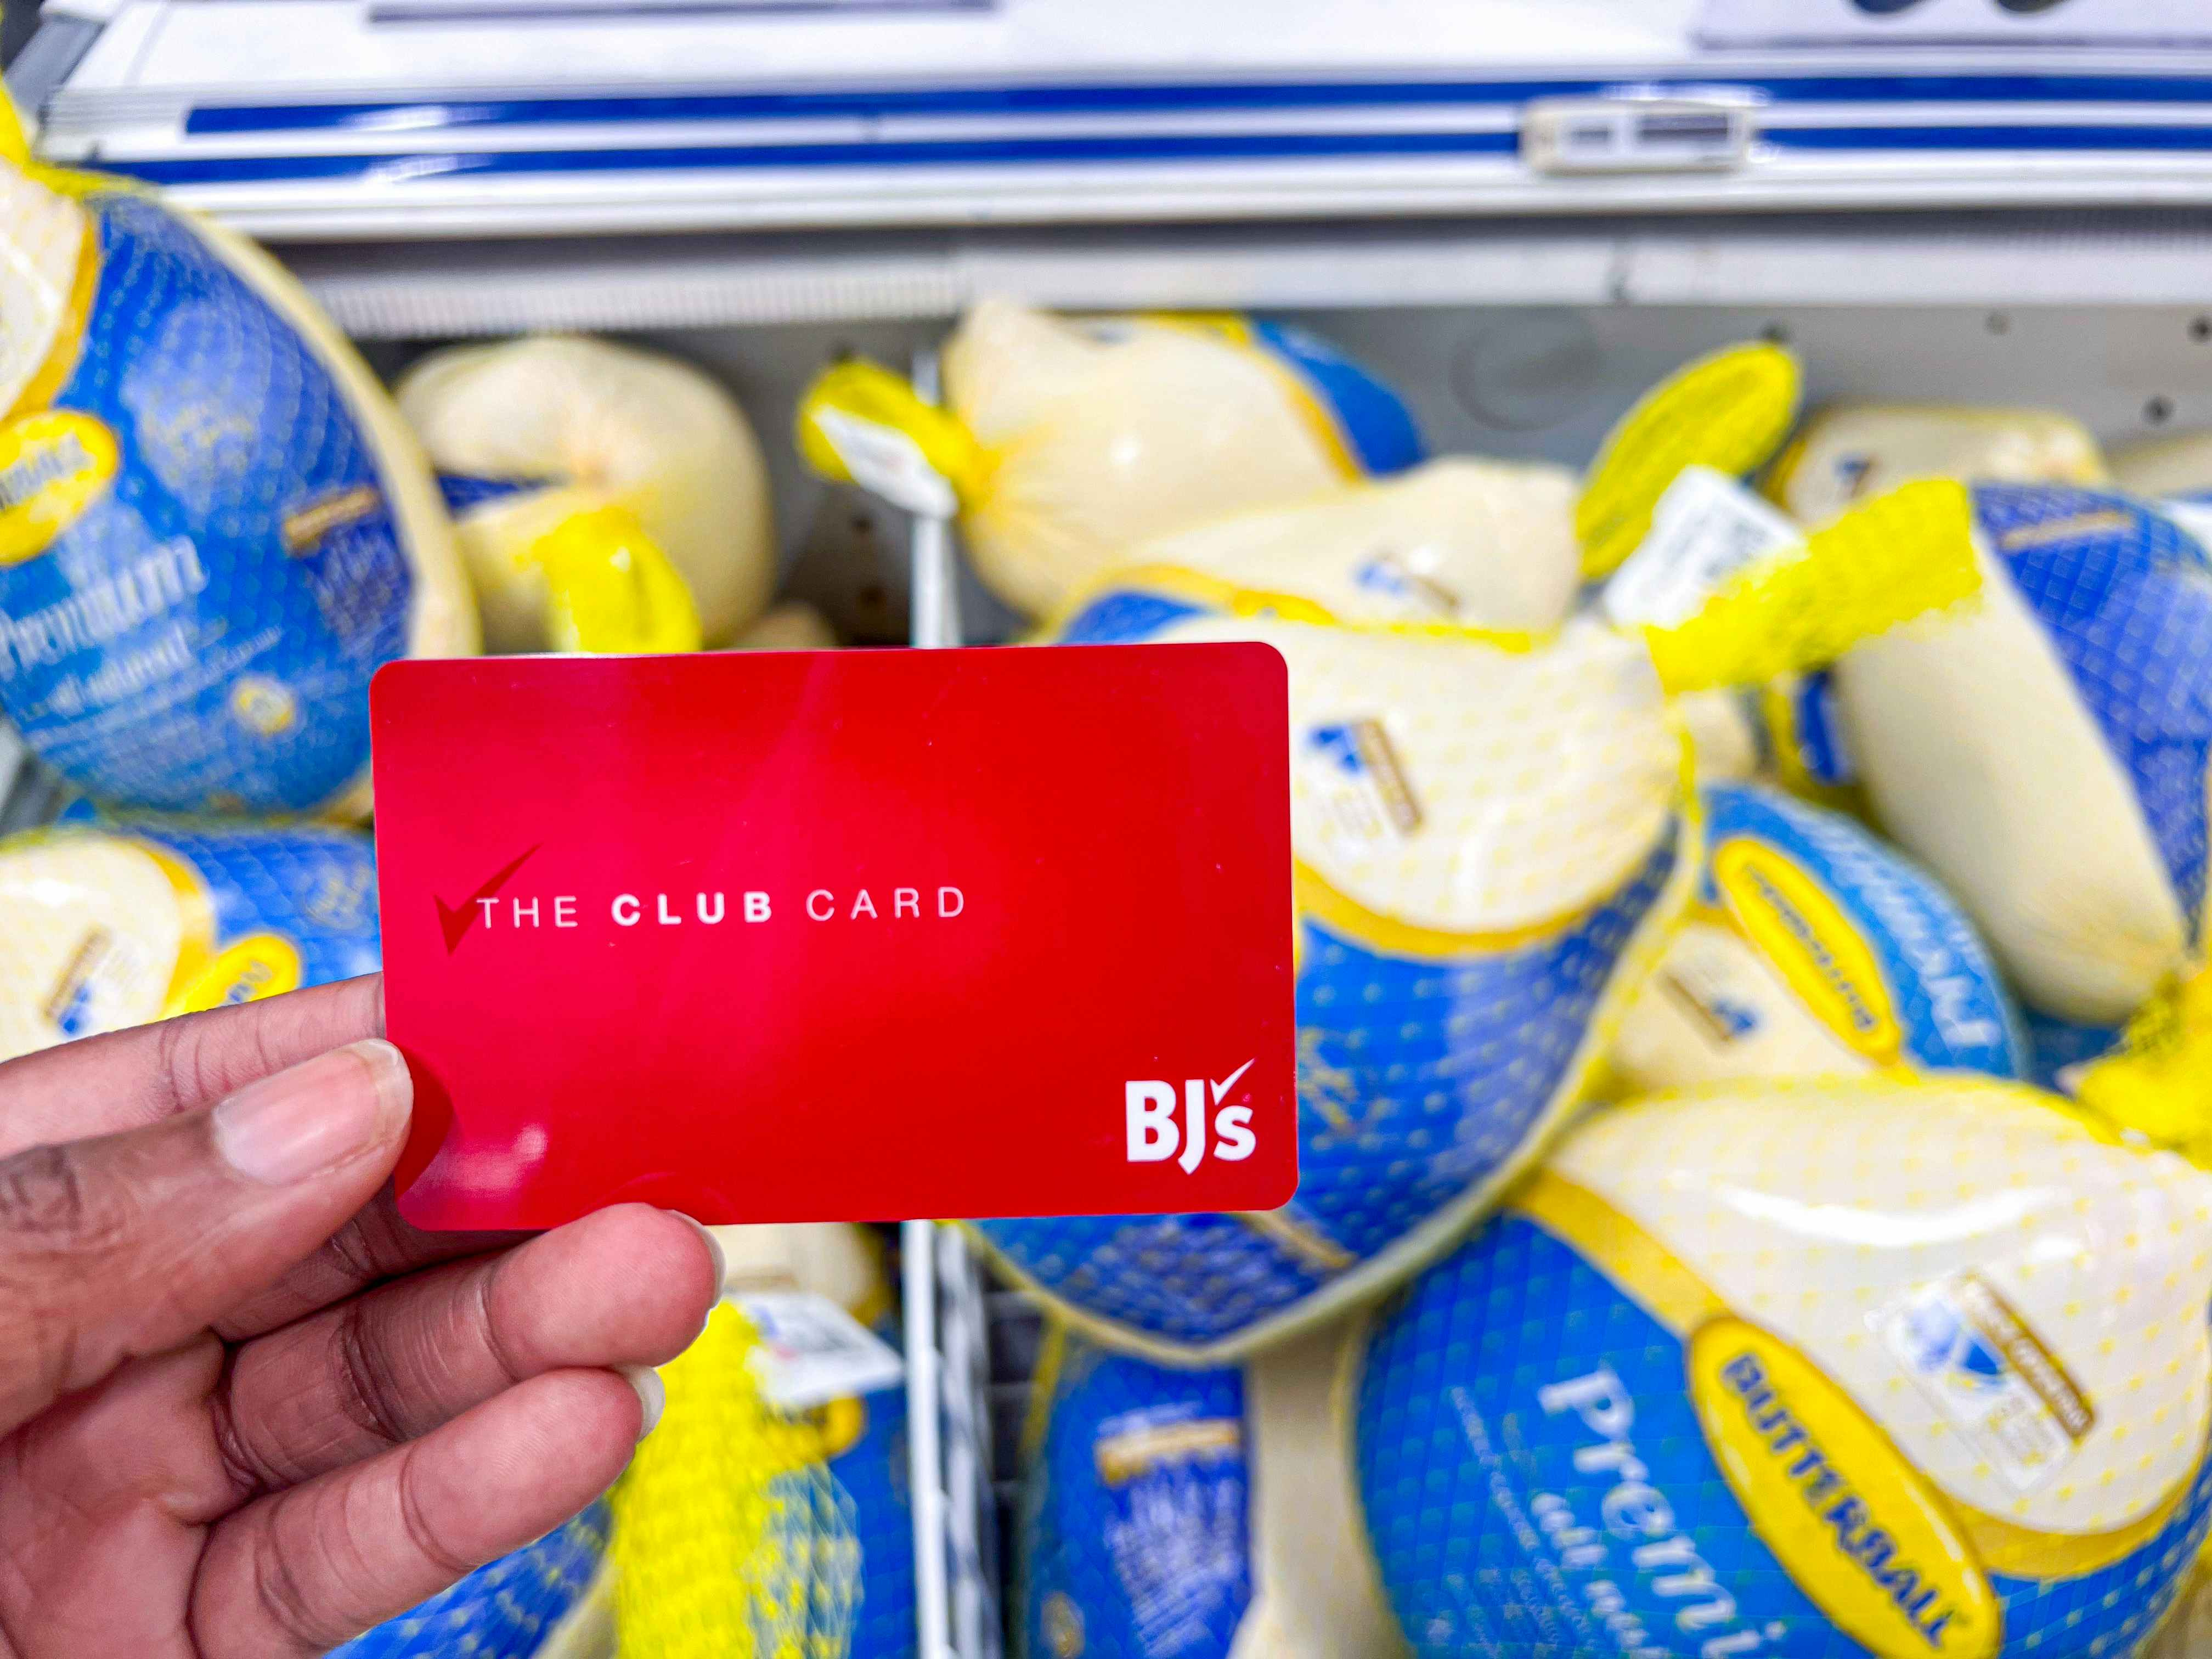 Hand holding a red Bj's Membership card